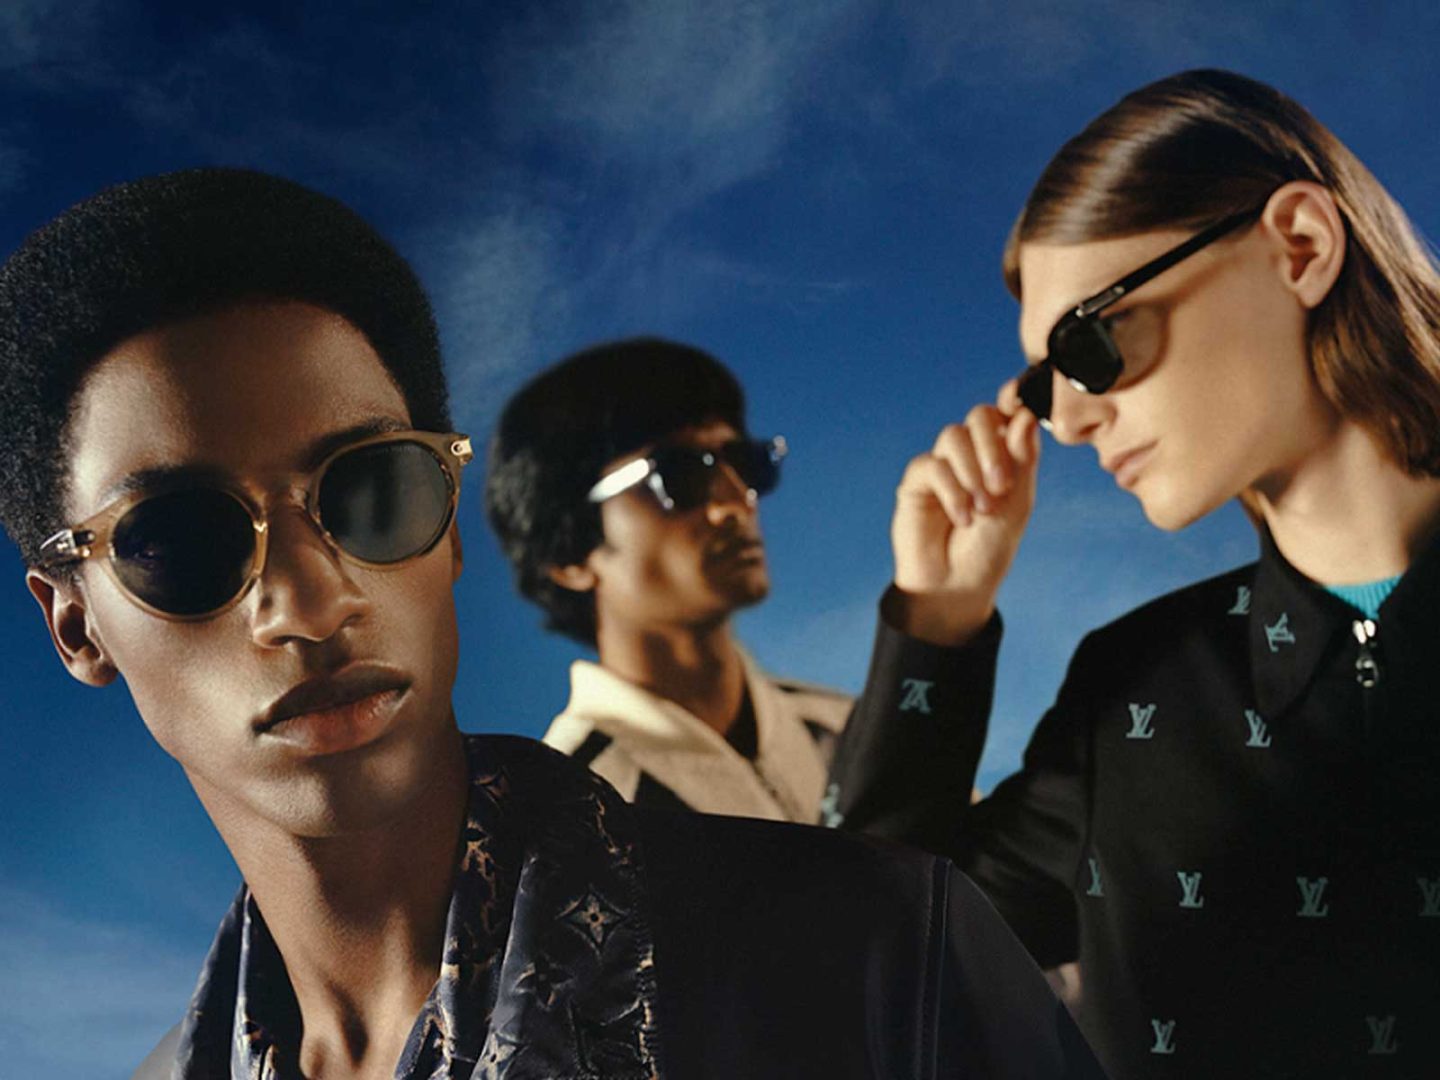 LV Signature: Louis Vuitton’s modern and timeless sunglass collection